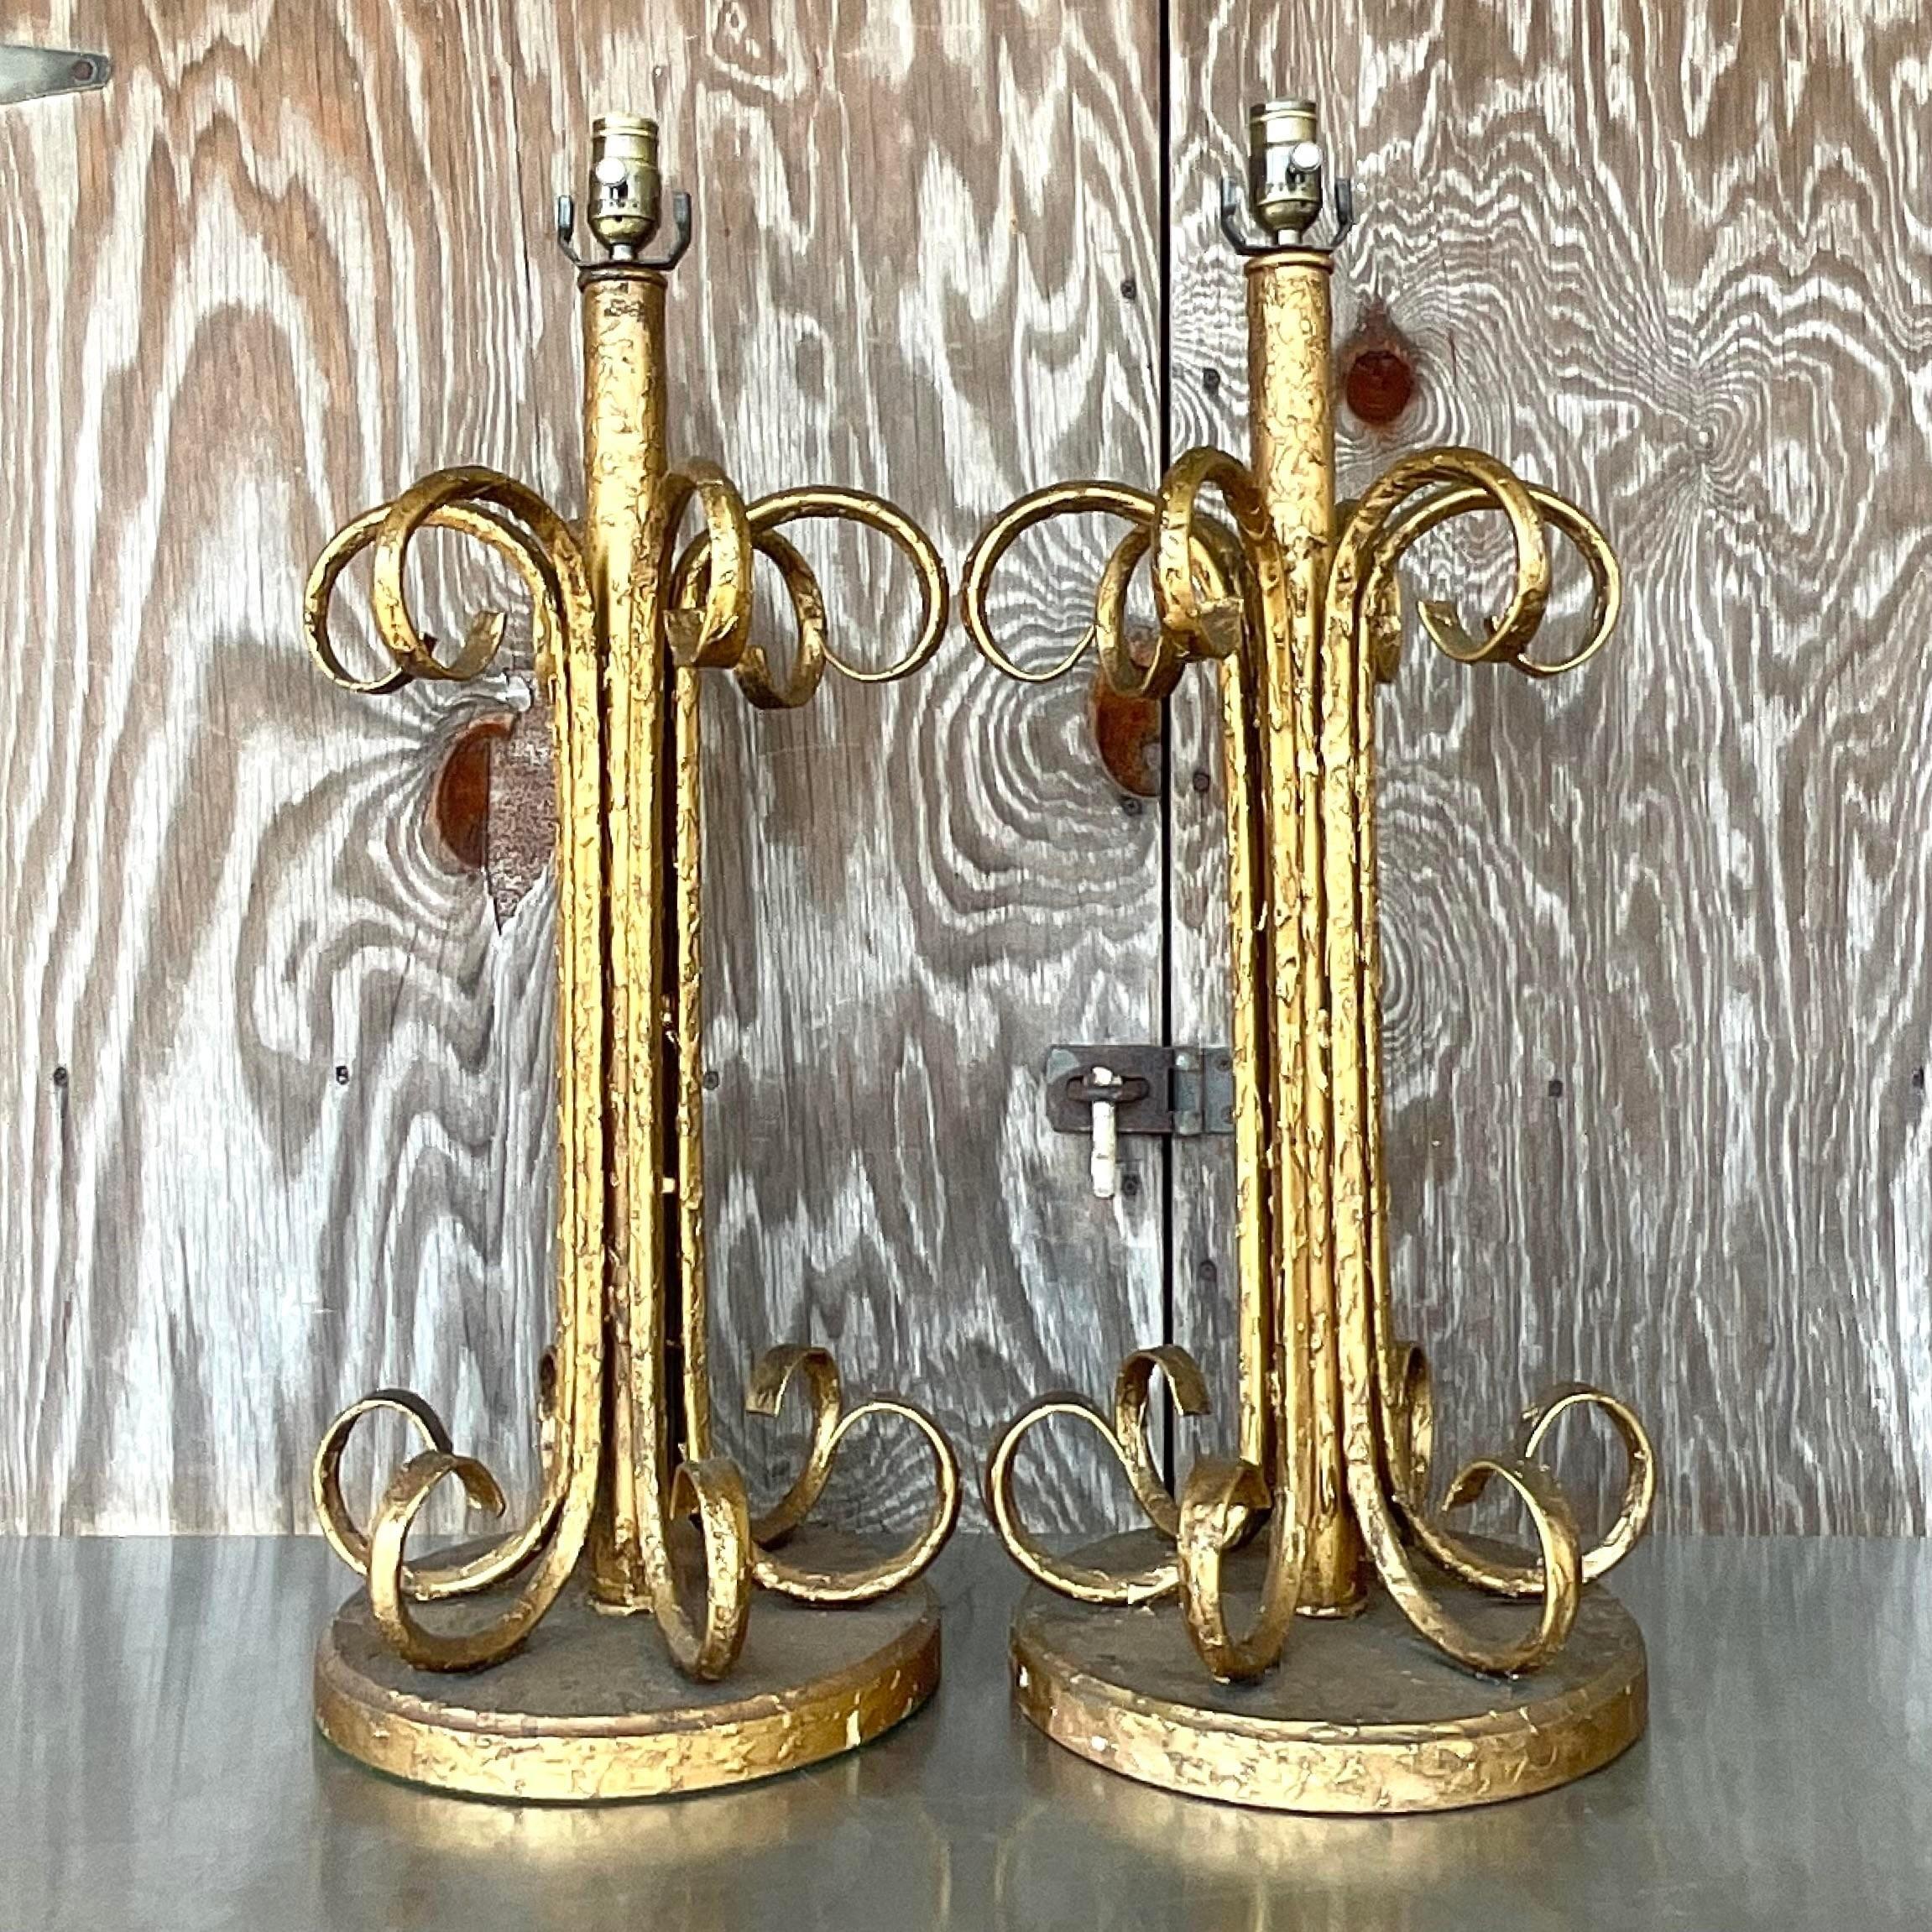 A fabulous pair of monumental table lamps. Chic gilt textured finish with a glamorous scroll design. Acquired from a Palm Beach estate.